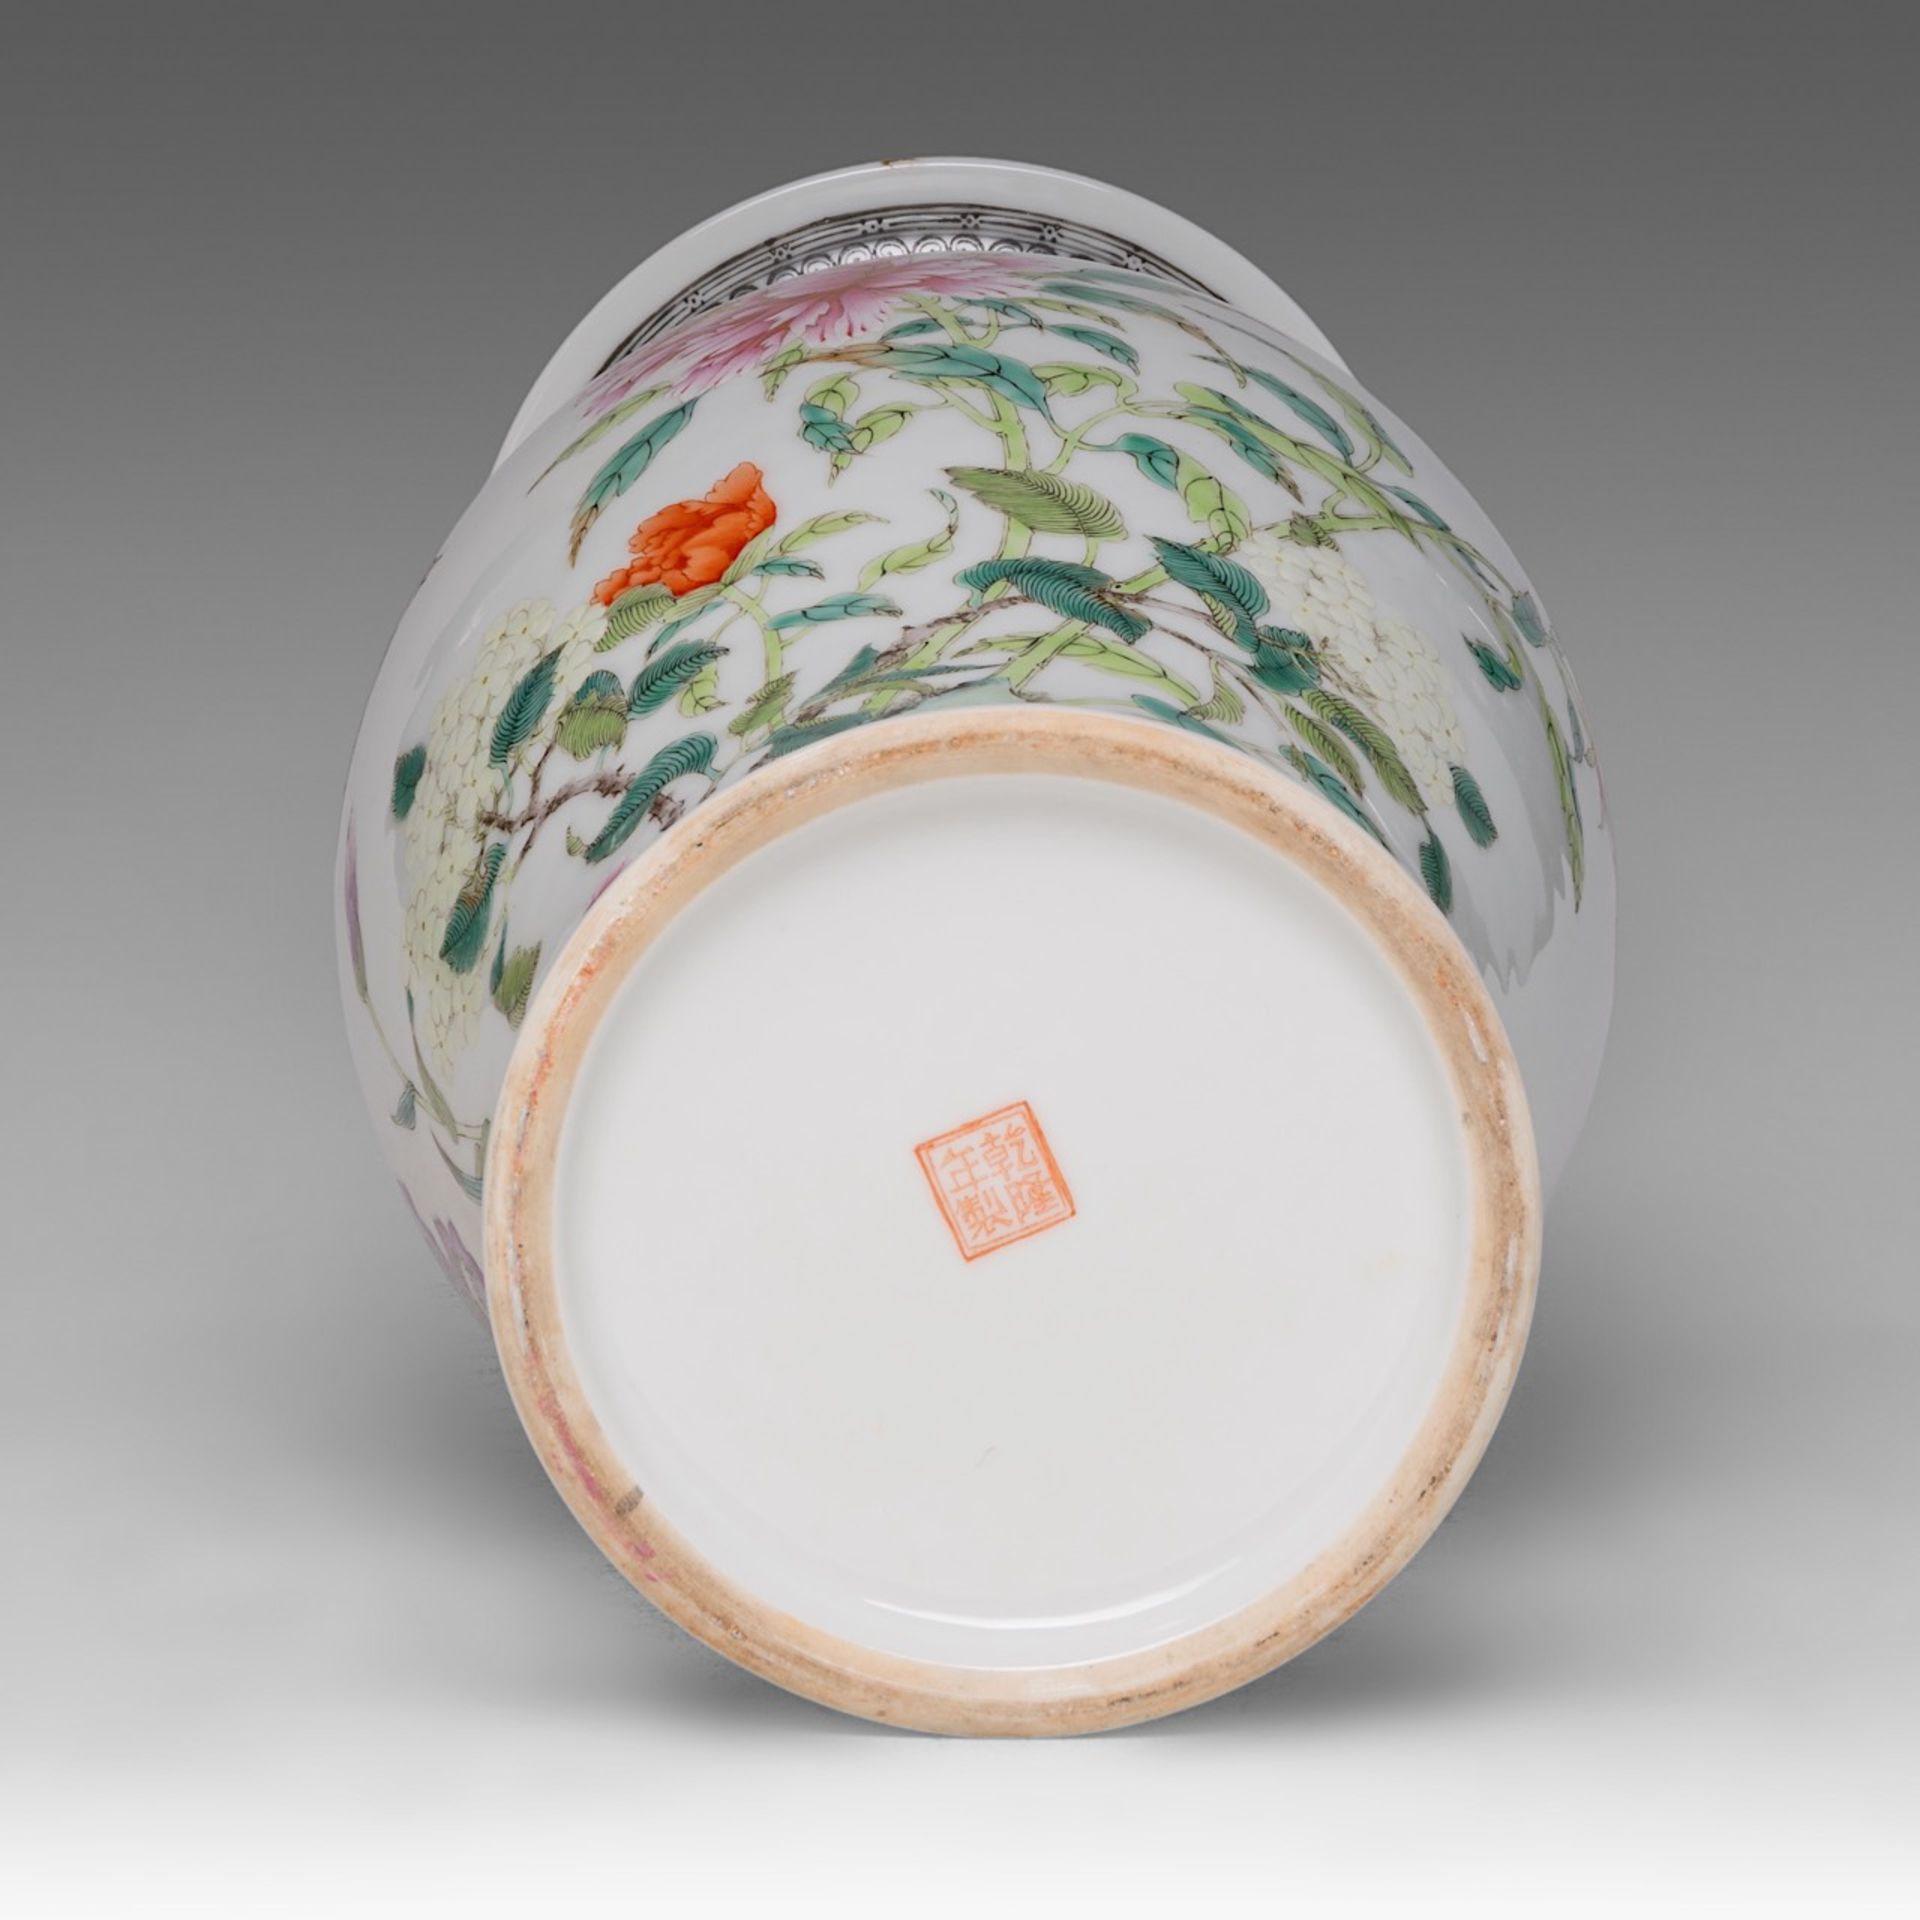 A Chinese famille rose 'Magpies in a Lotus Garden' vase, the back with a signed text, 20thC, H 41,3 - Bild 6 aus 6